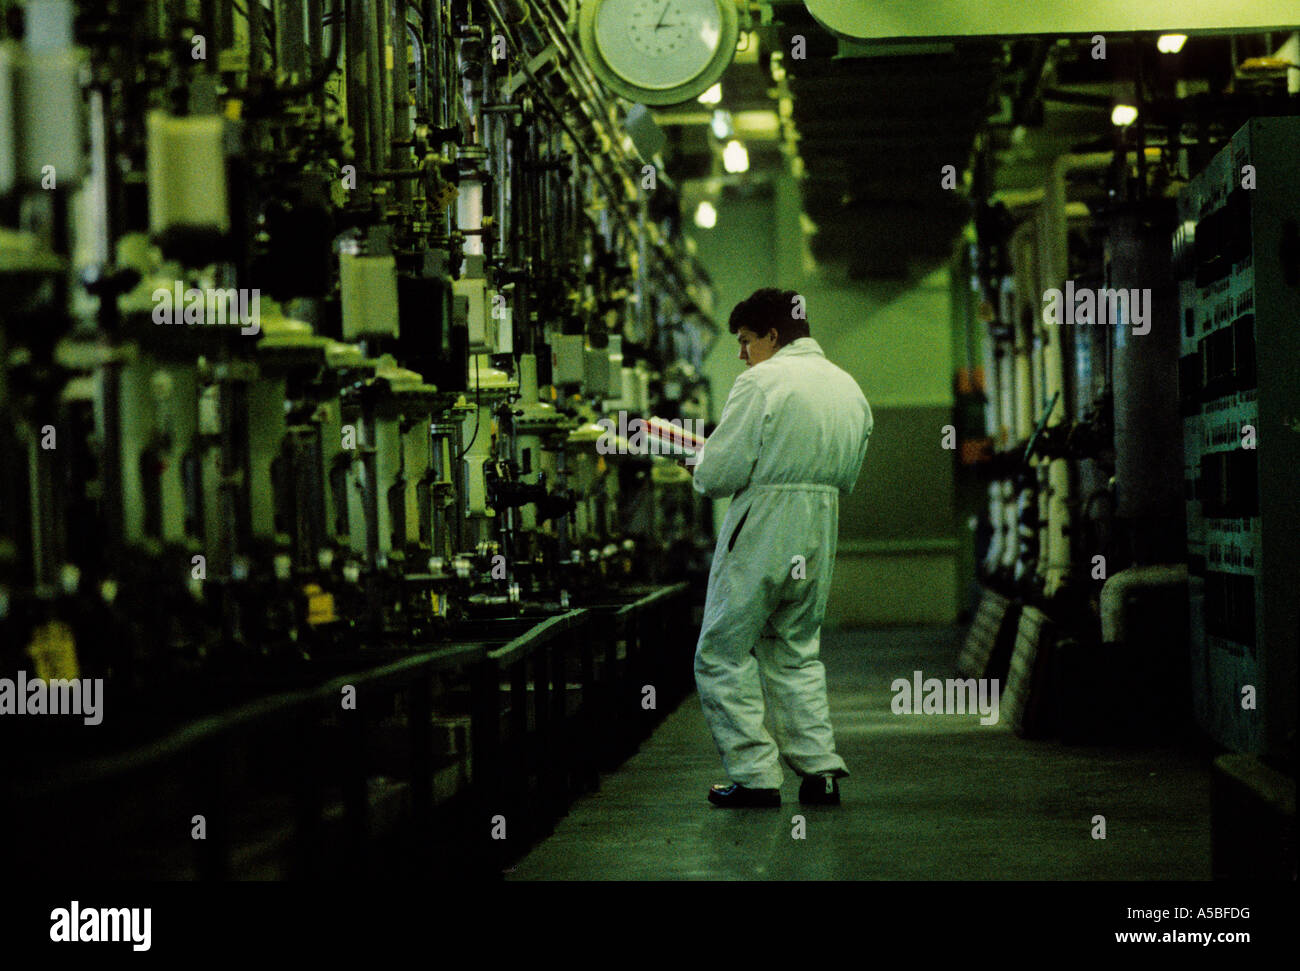 Sellafield Nuclear reprocessing plant, Cumbria England showing the Magnox reprocessing area 1986 Stock Photo